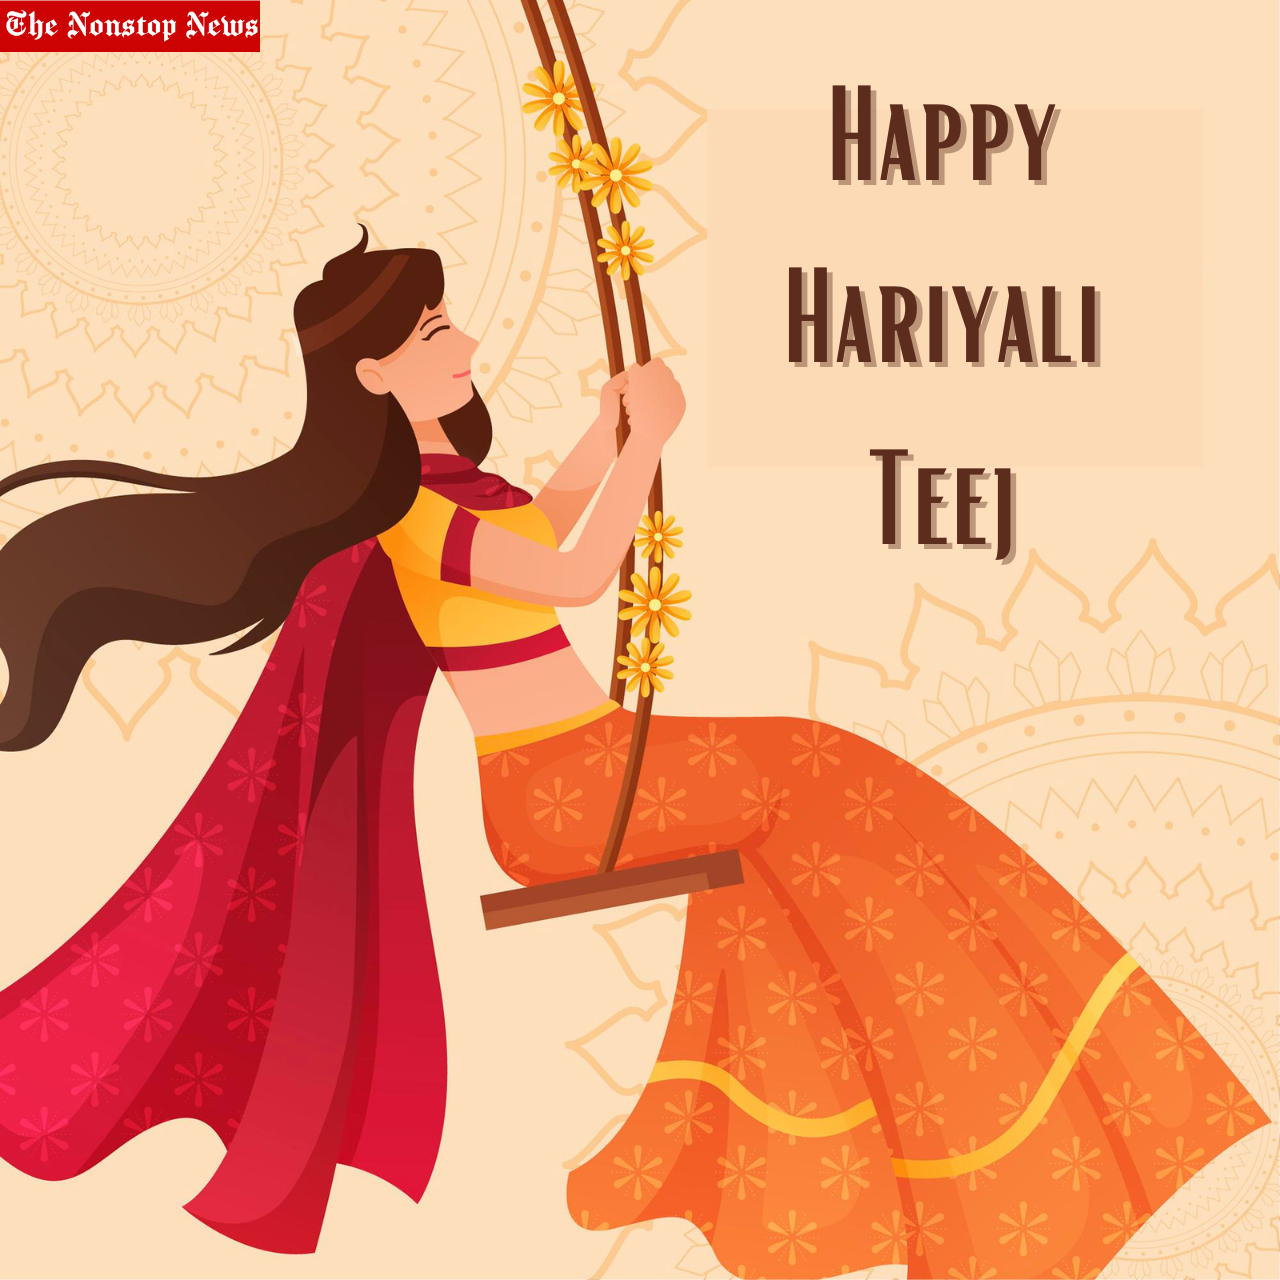 Happy Hartalika Teej 2022: Wishes, Images, Messages, Quotes, Greetings, and Social Media Posts to share